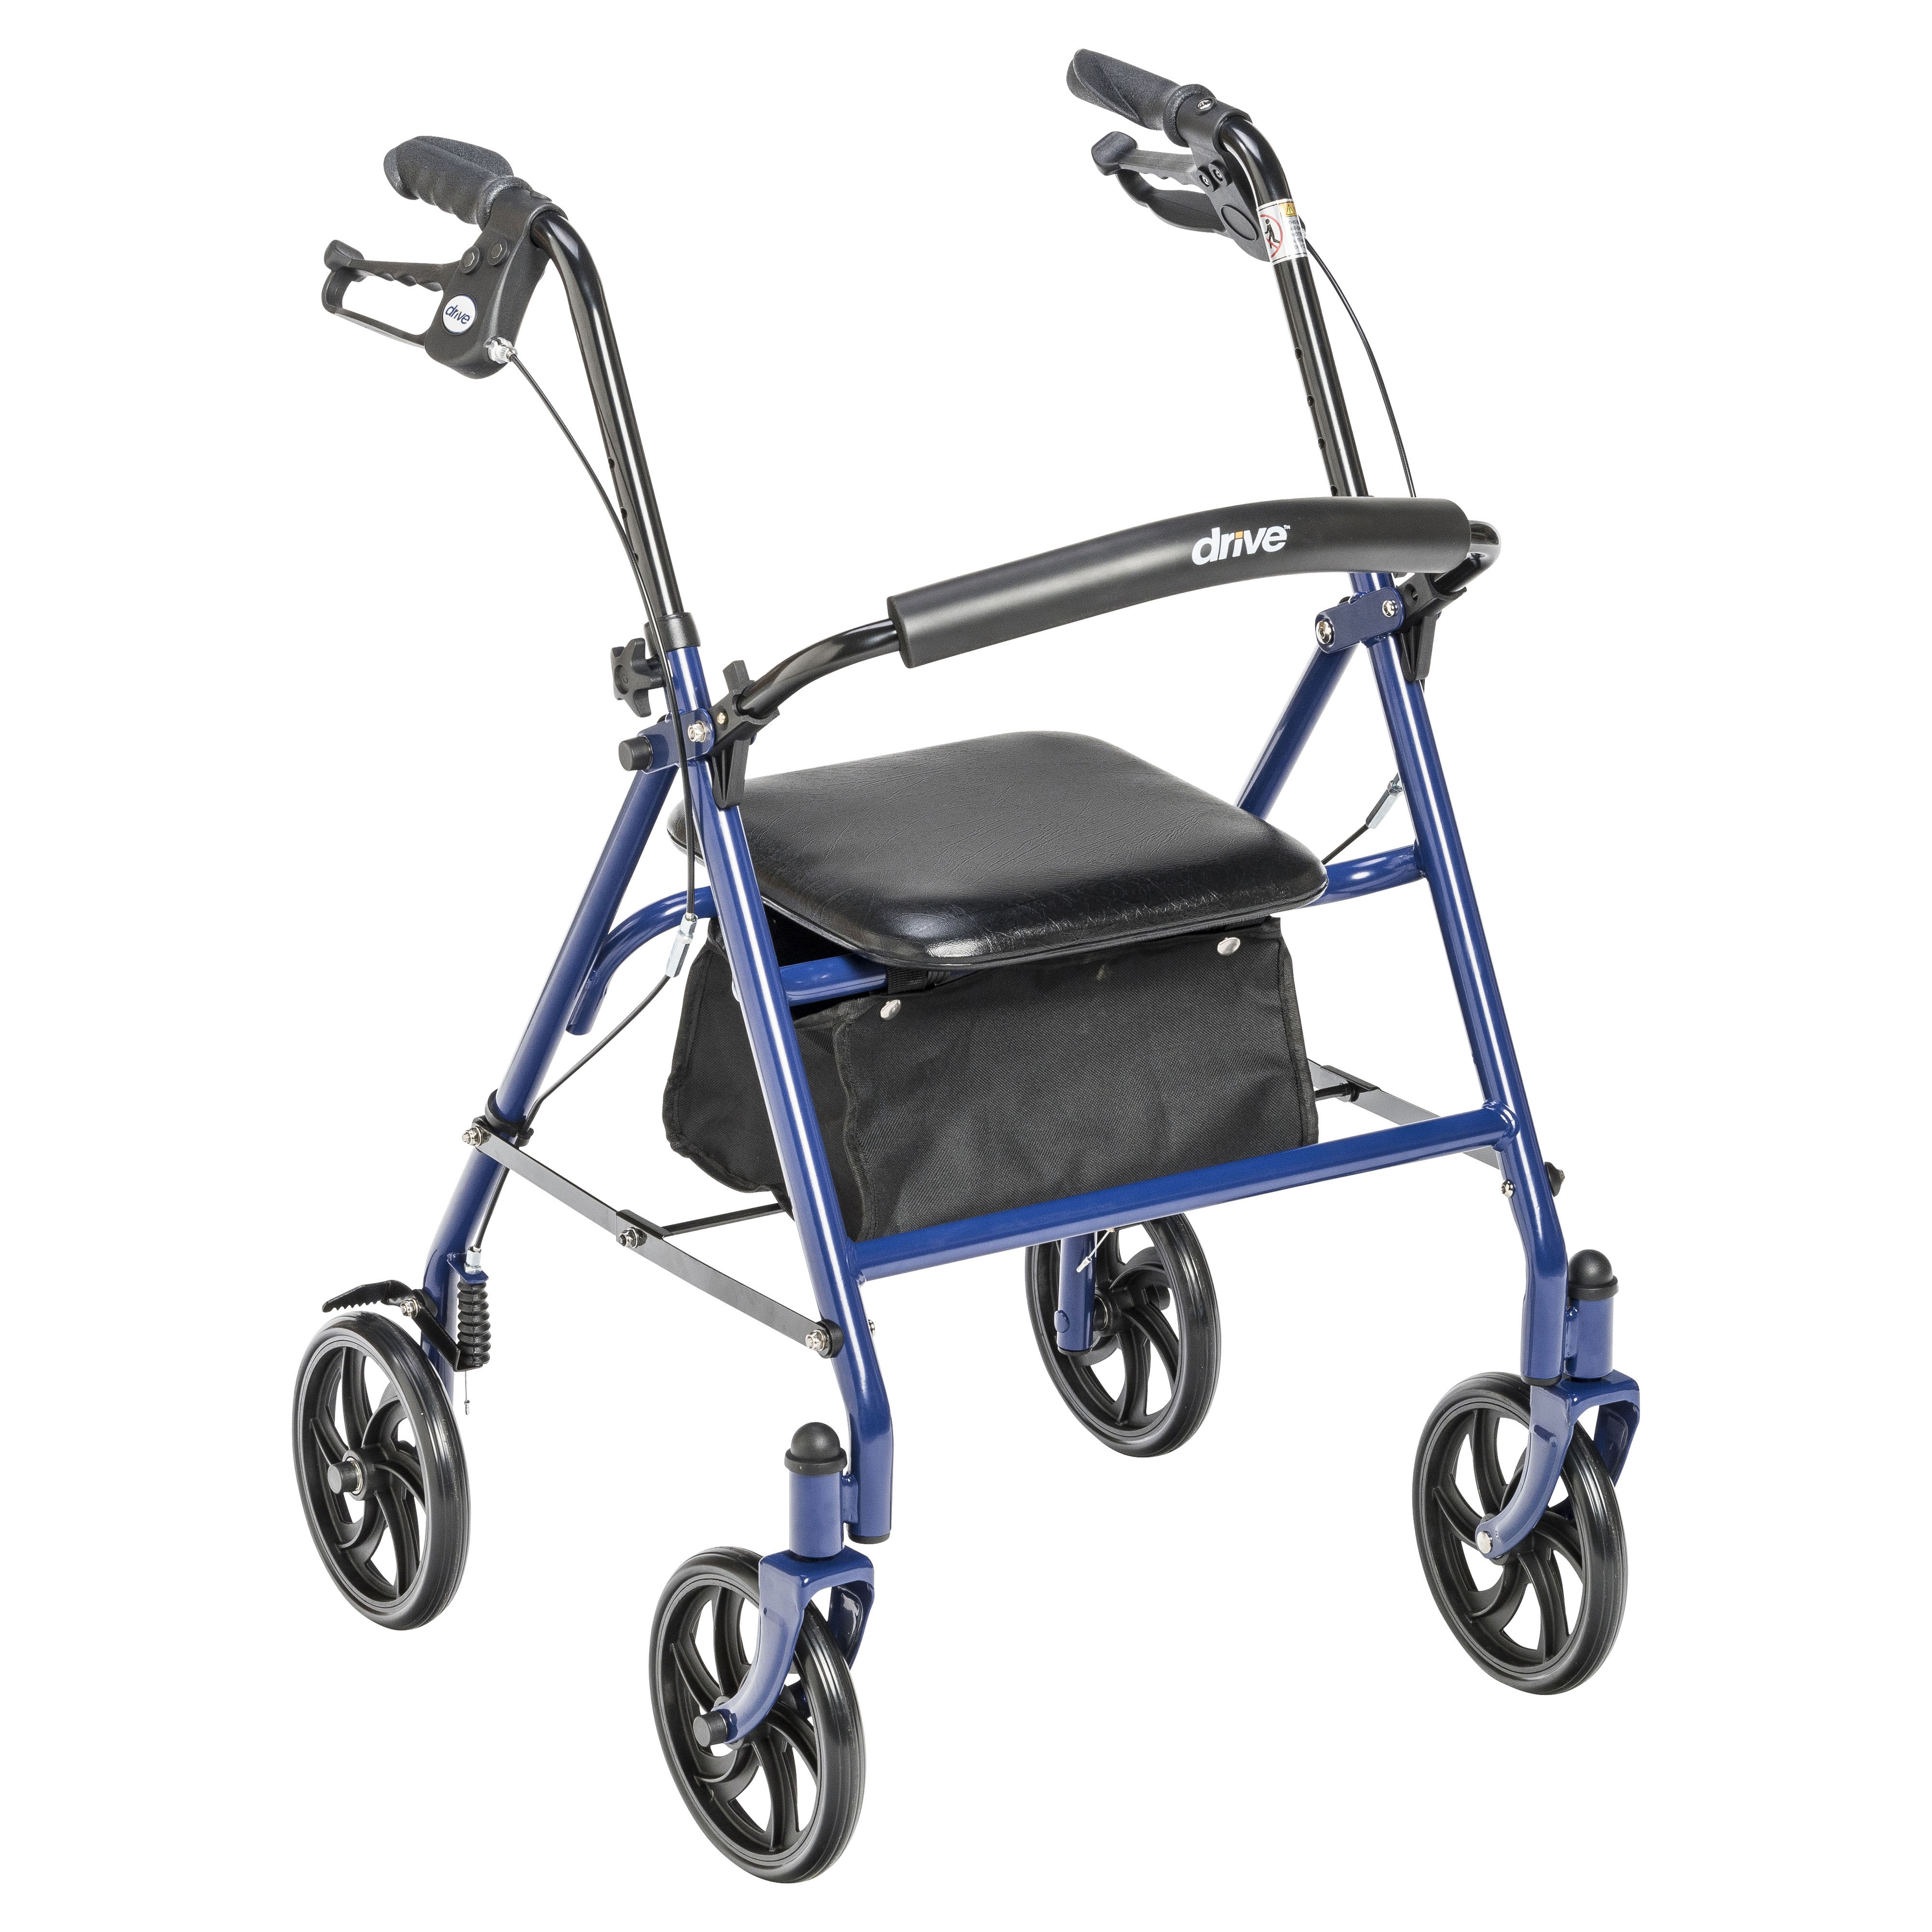 Drive Medical Four Wheel Rollator Rolling Walker with Fold Up Removable Back Support, Blue - image 1 of 9